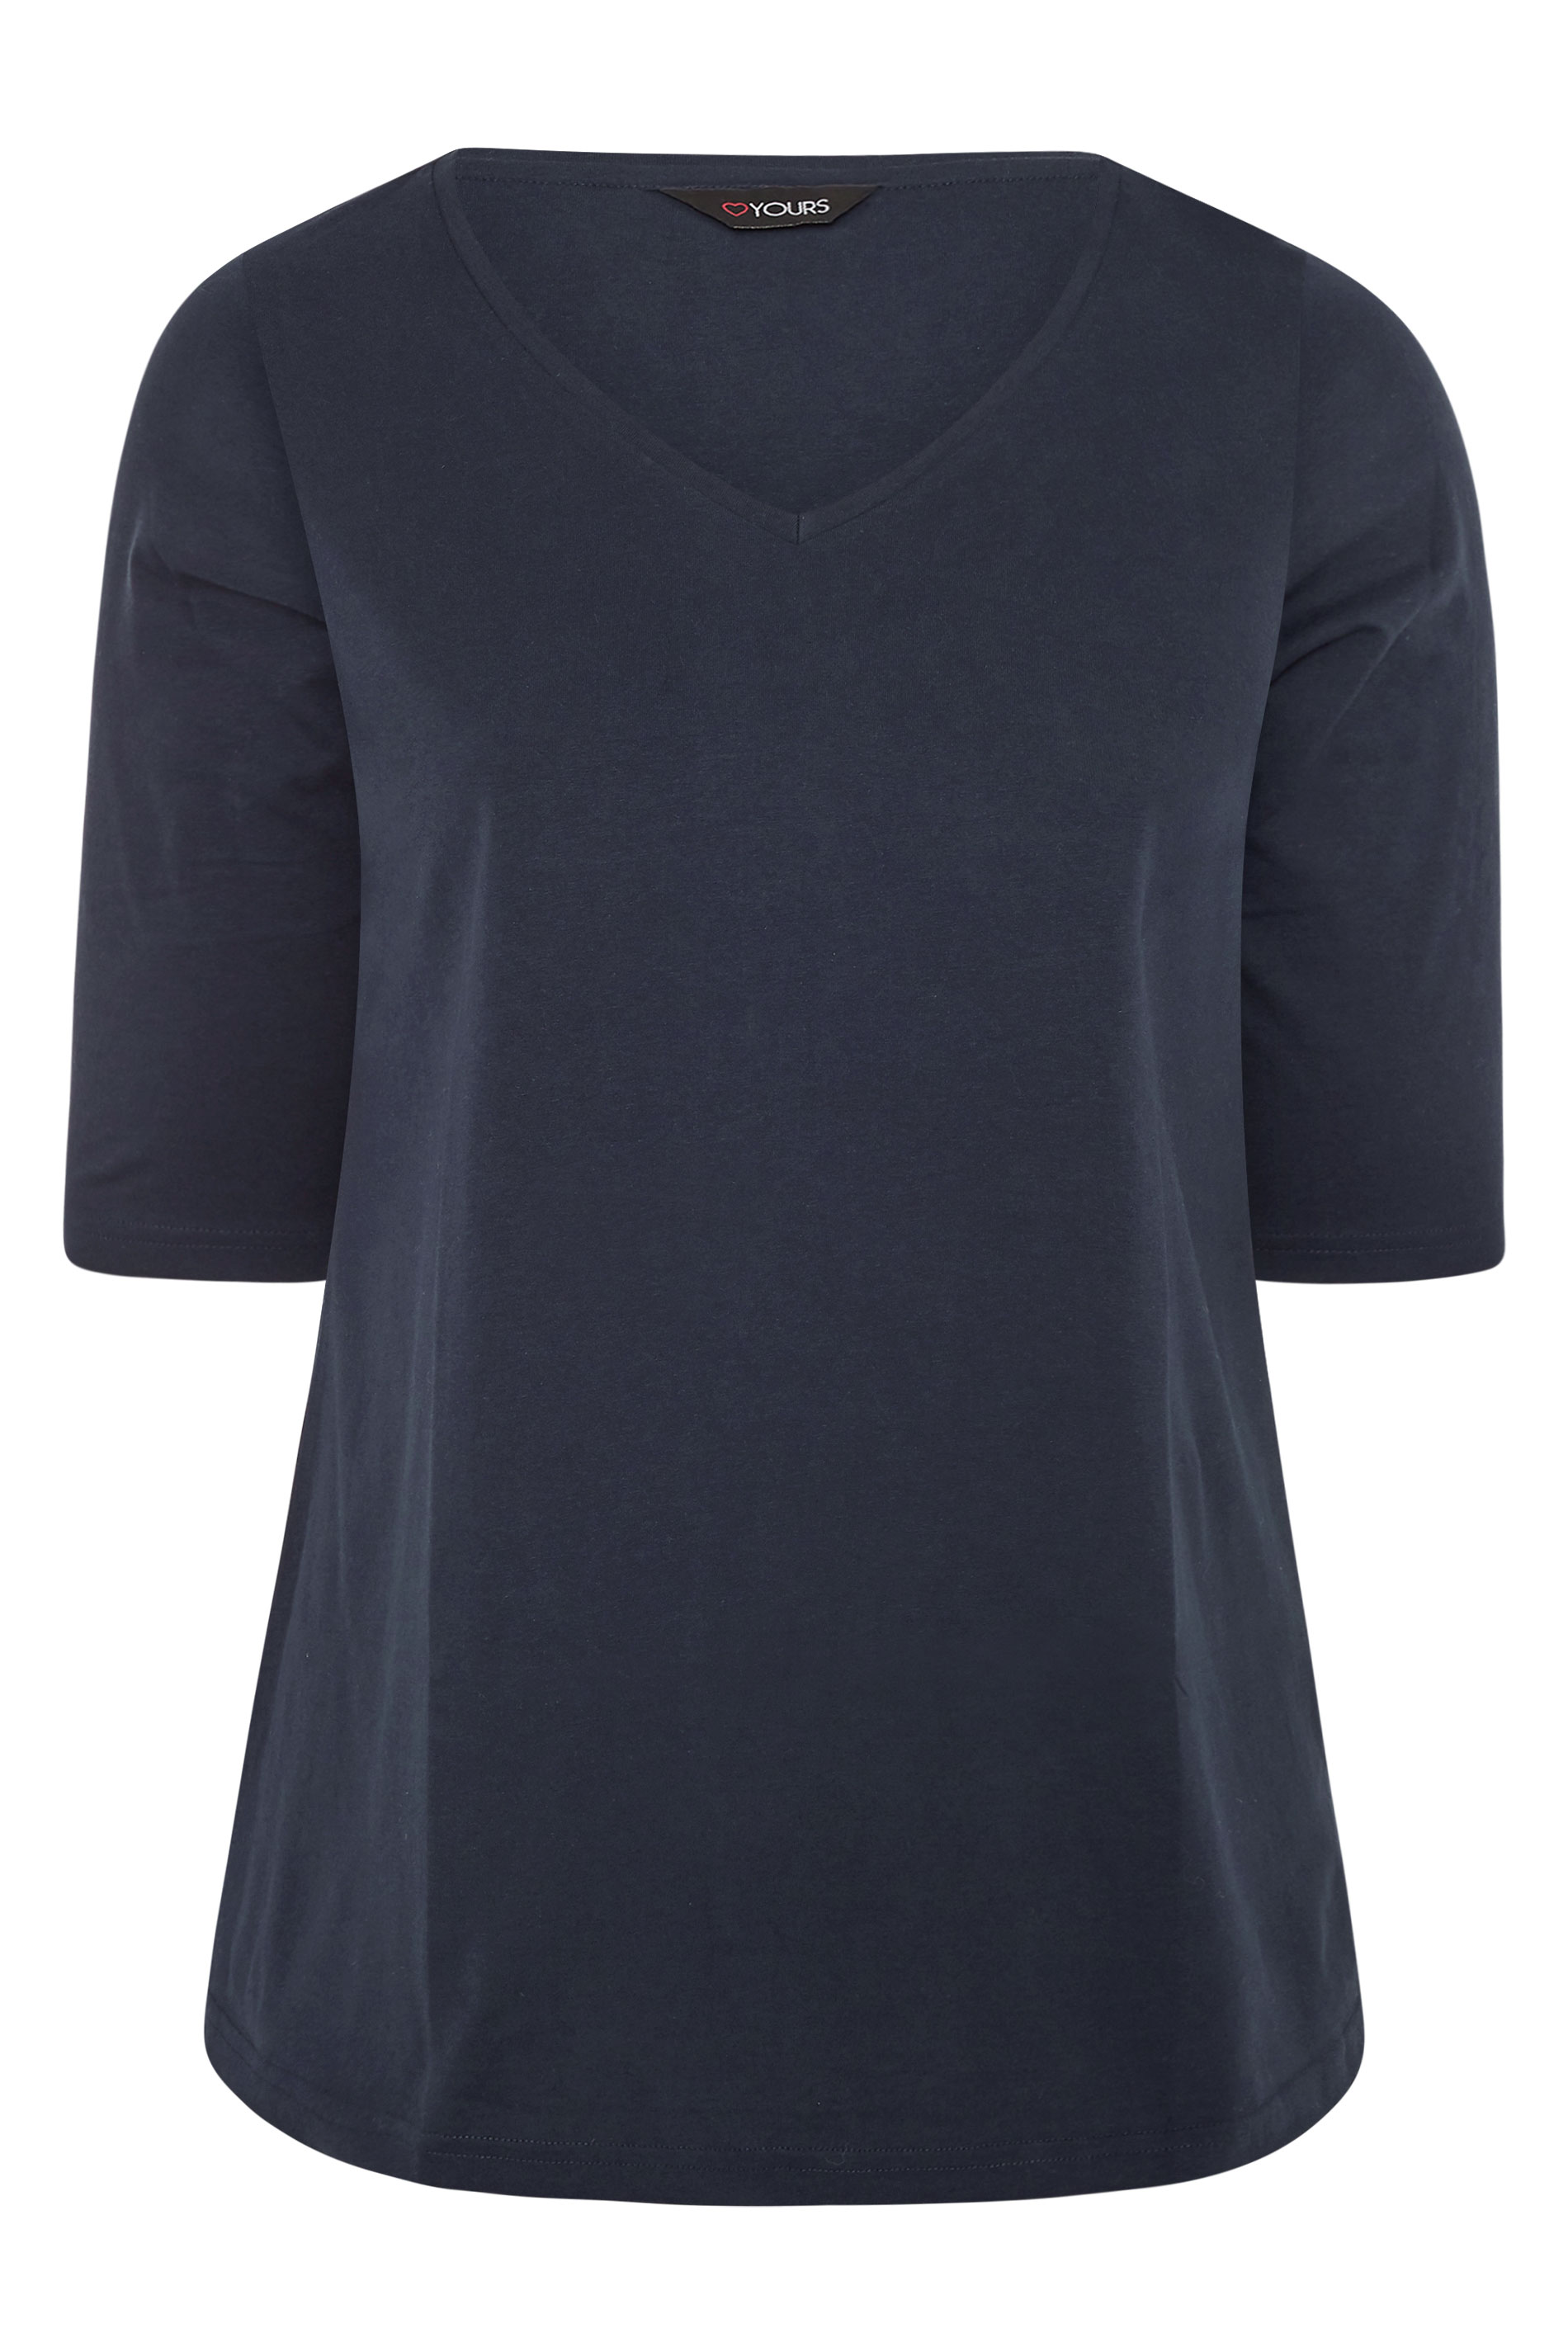 Plus Size YOURS FOR GOOD Navy V-Neck Top | Yours Clothing